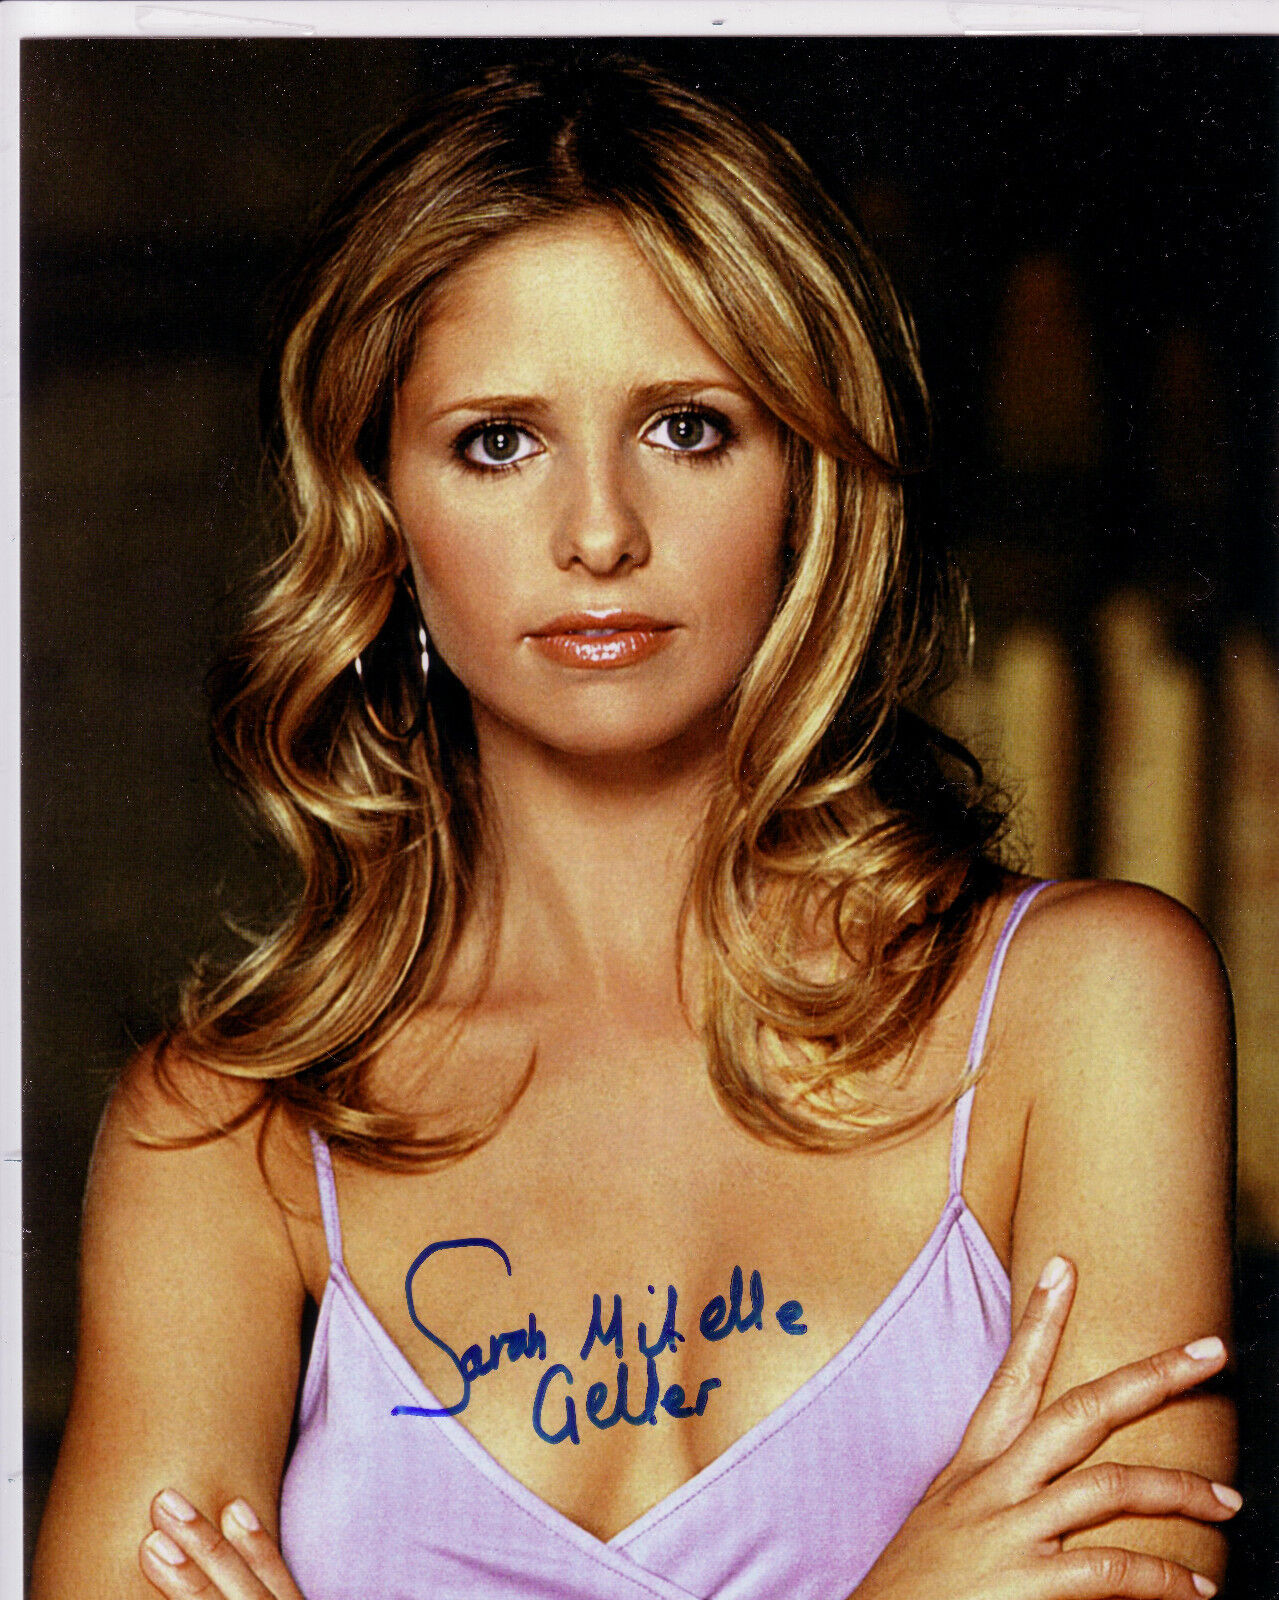 SARAH MICHELLE GELLAR AUTOGRAPH SIGNED PP Photo Poster painting POSTER 44